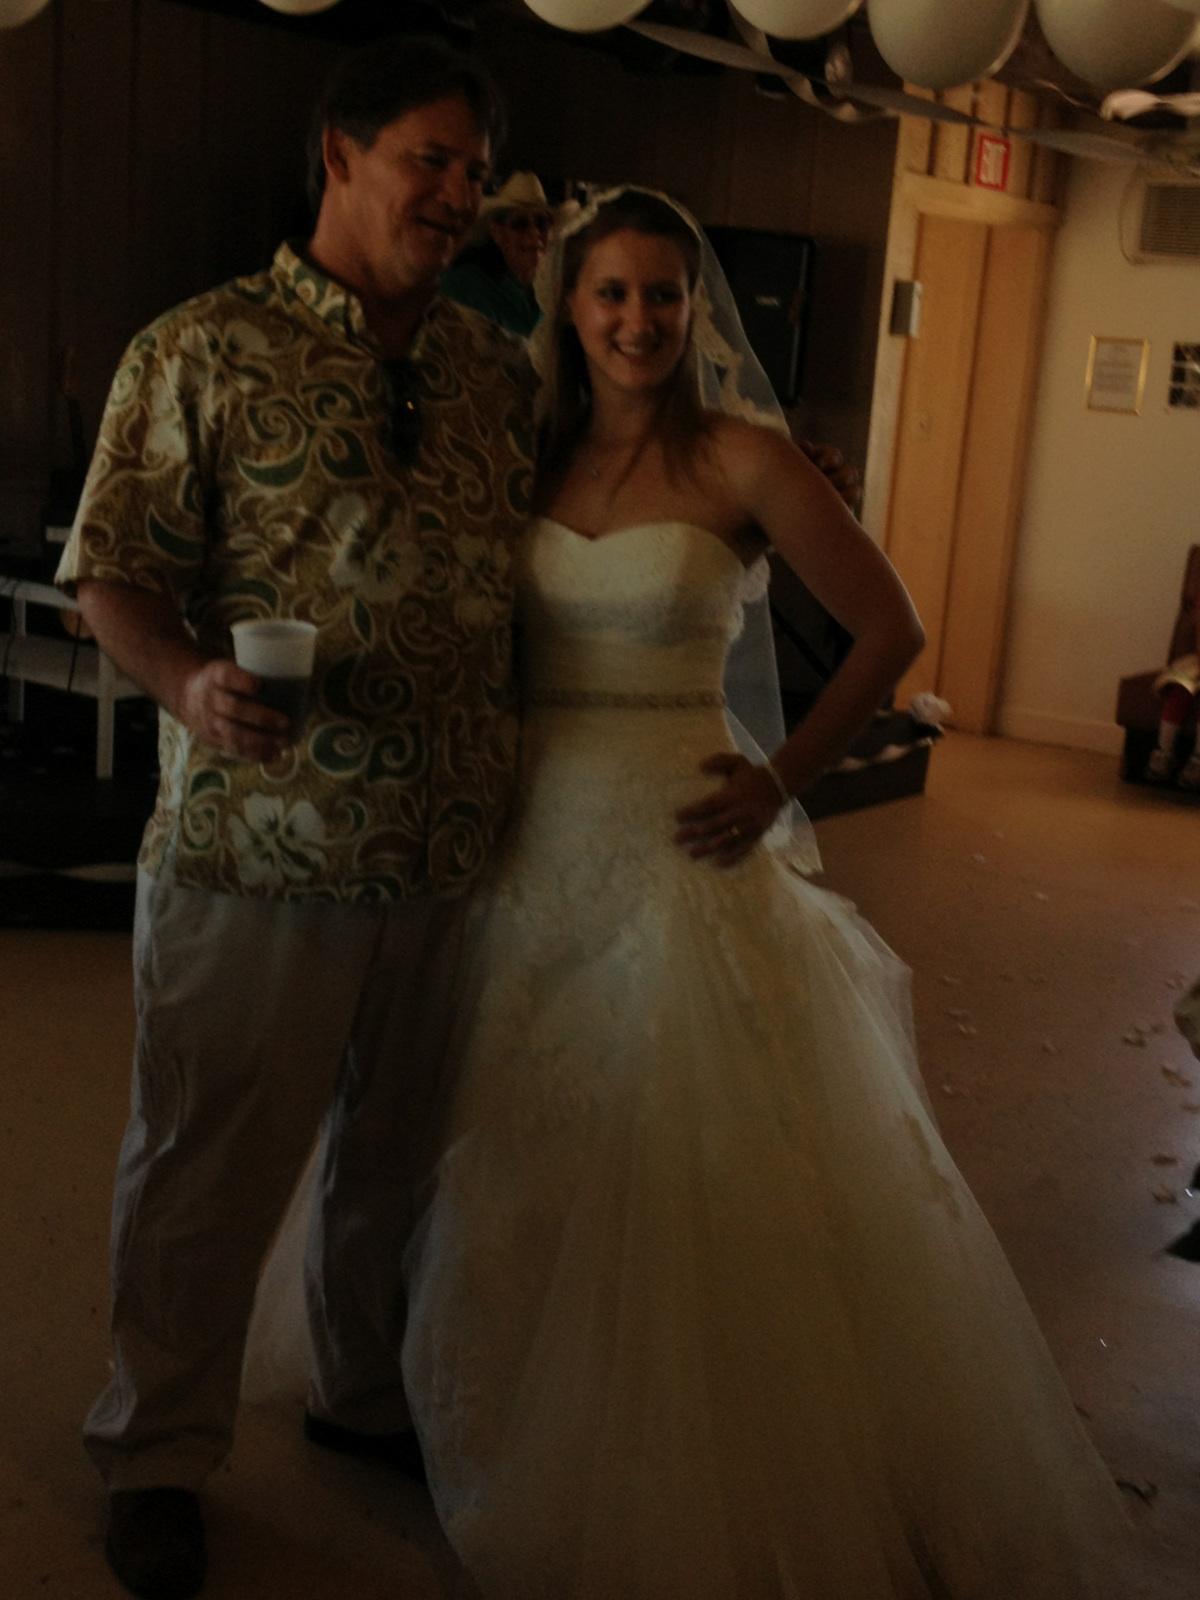 My dad and I at my wedding reception